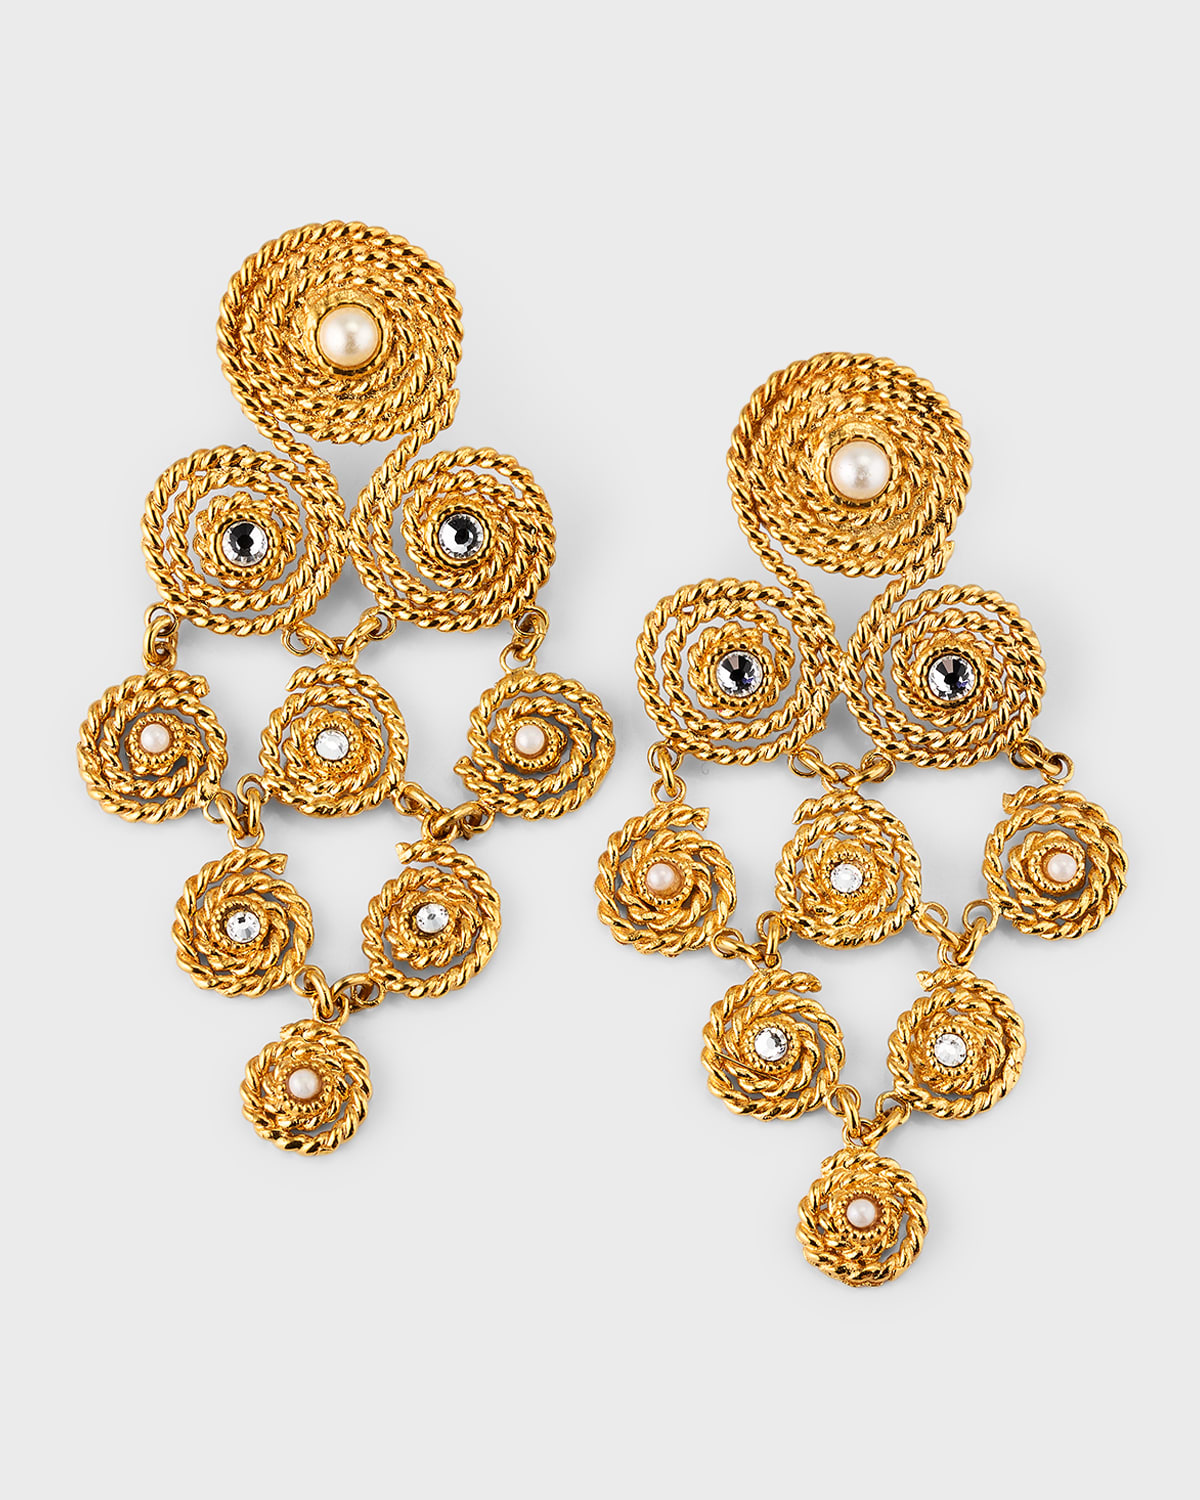 Mistral Pearl and Strass Statement Earrings